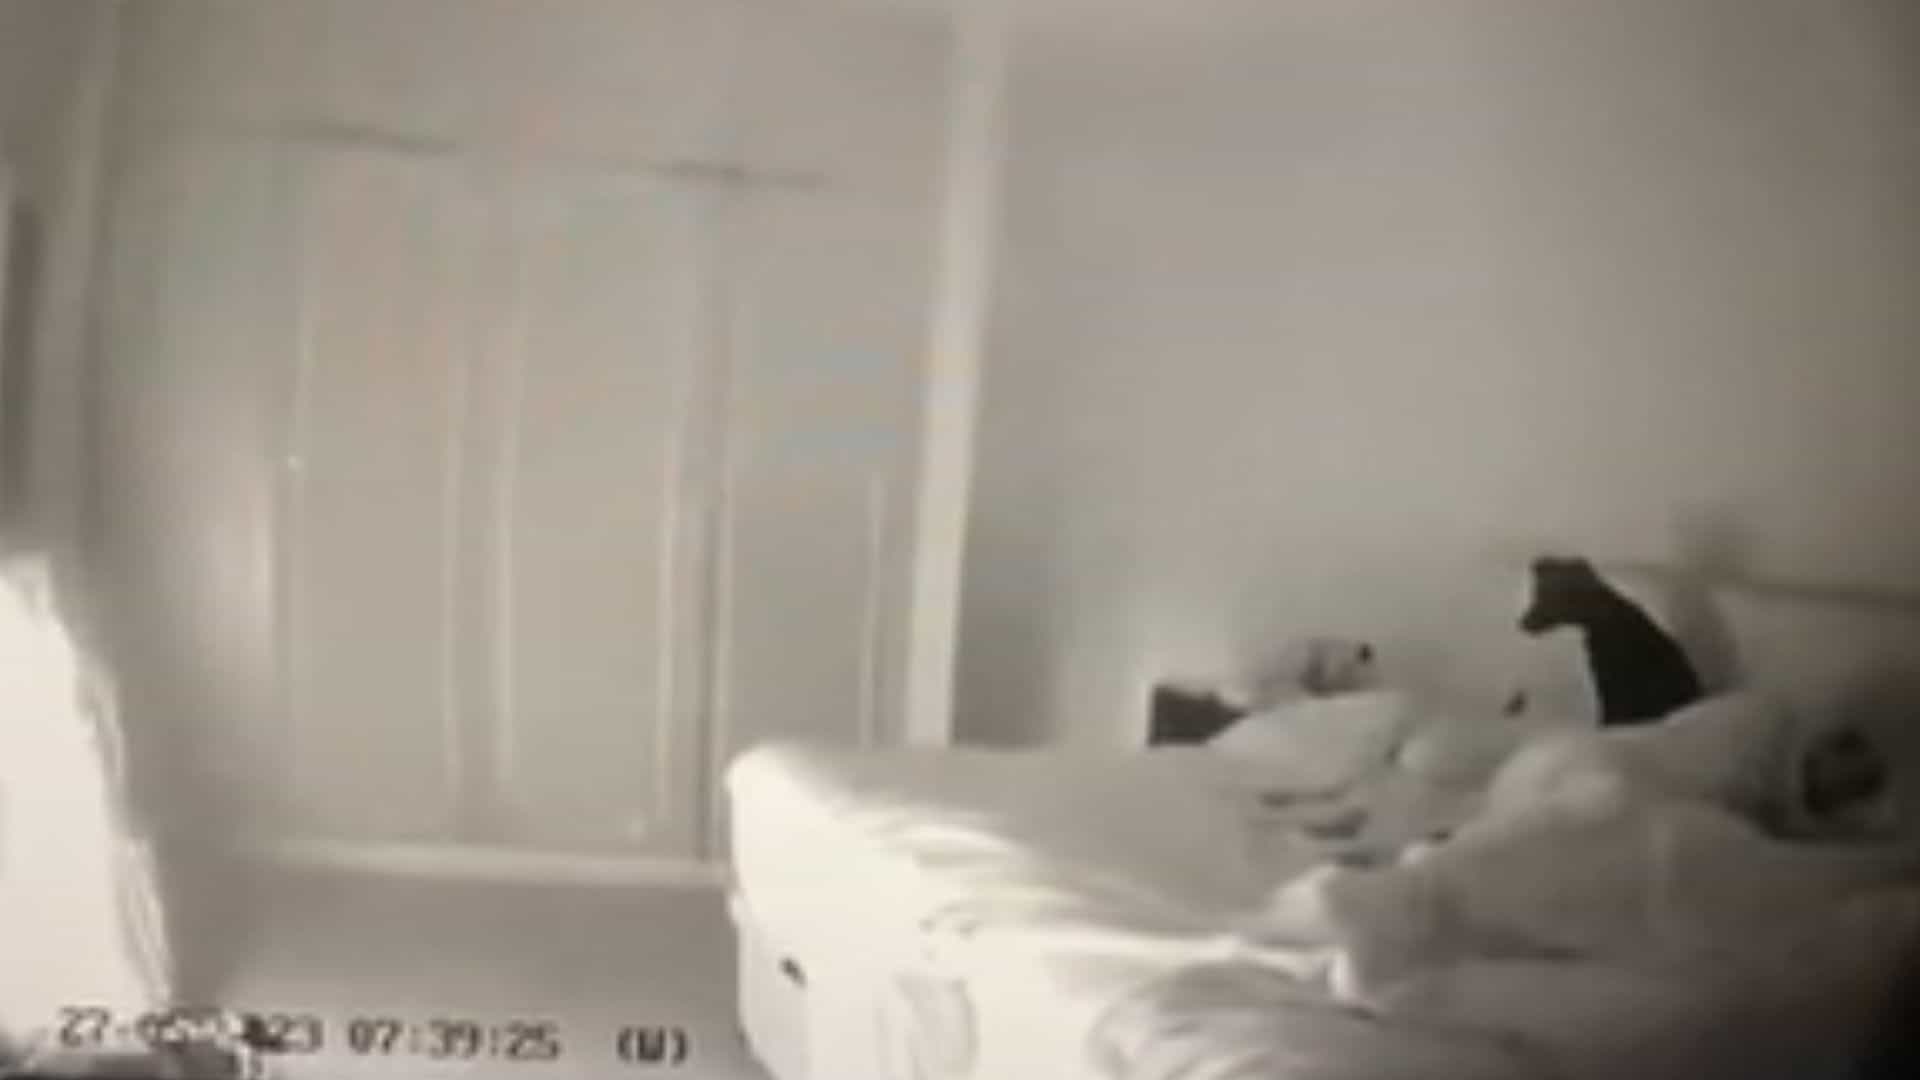 Heroic Dog Wakes Owner To Avert A Deadly Threat Inside Their Room